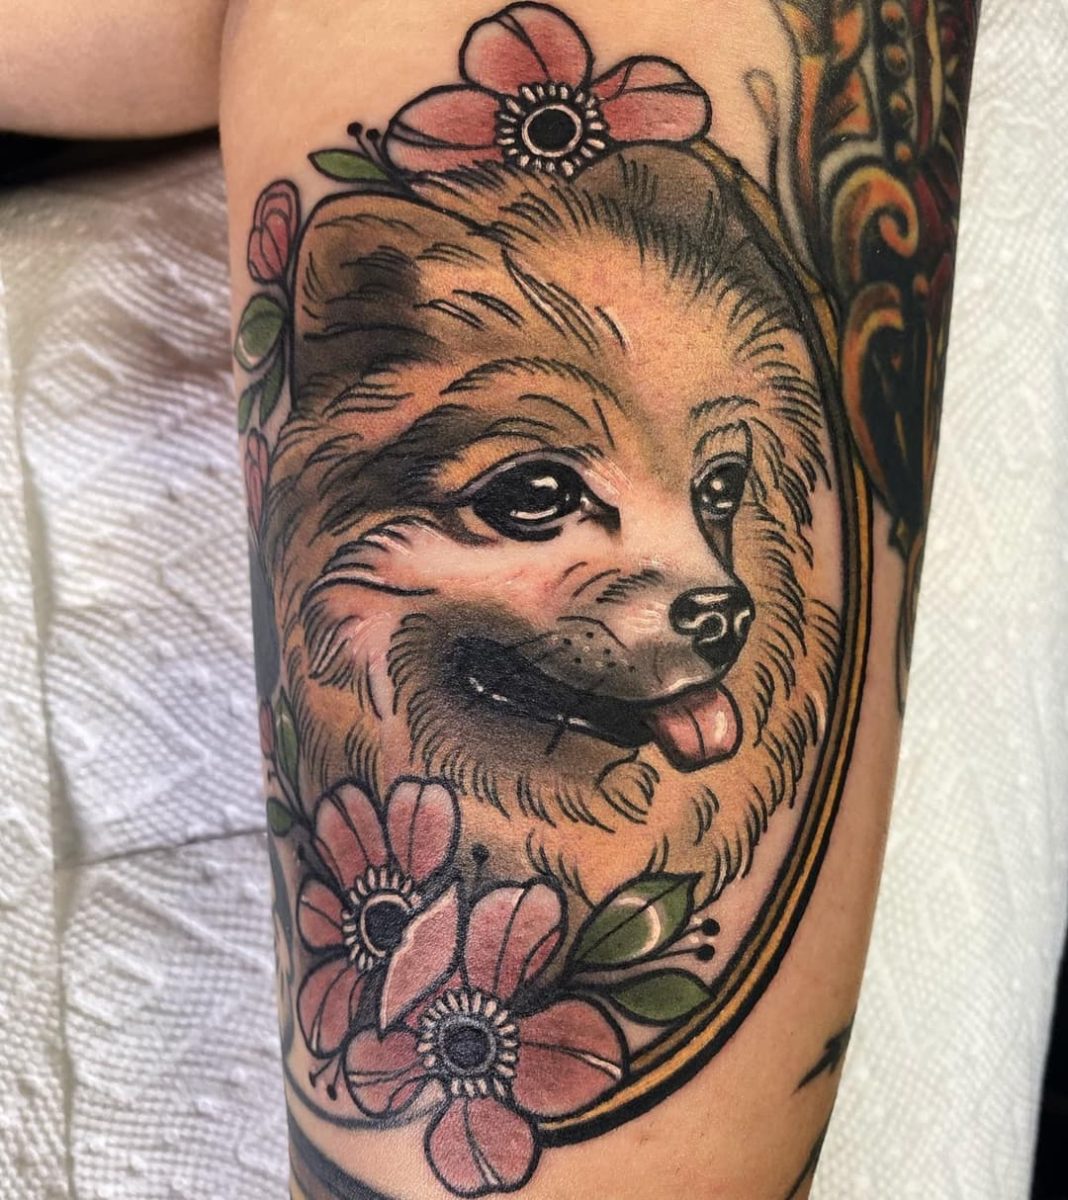 50 Dog Tattoo Ideas for the Perfect Pet Portrait | Discover some awesome dog tattoo ideas.